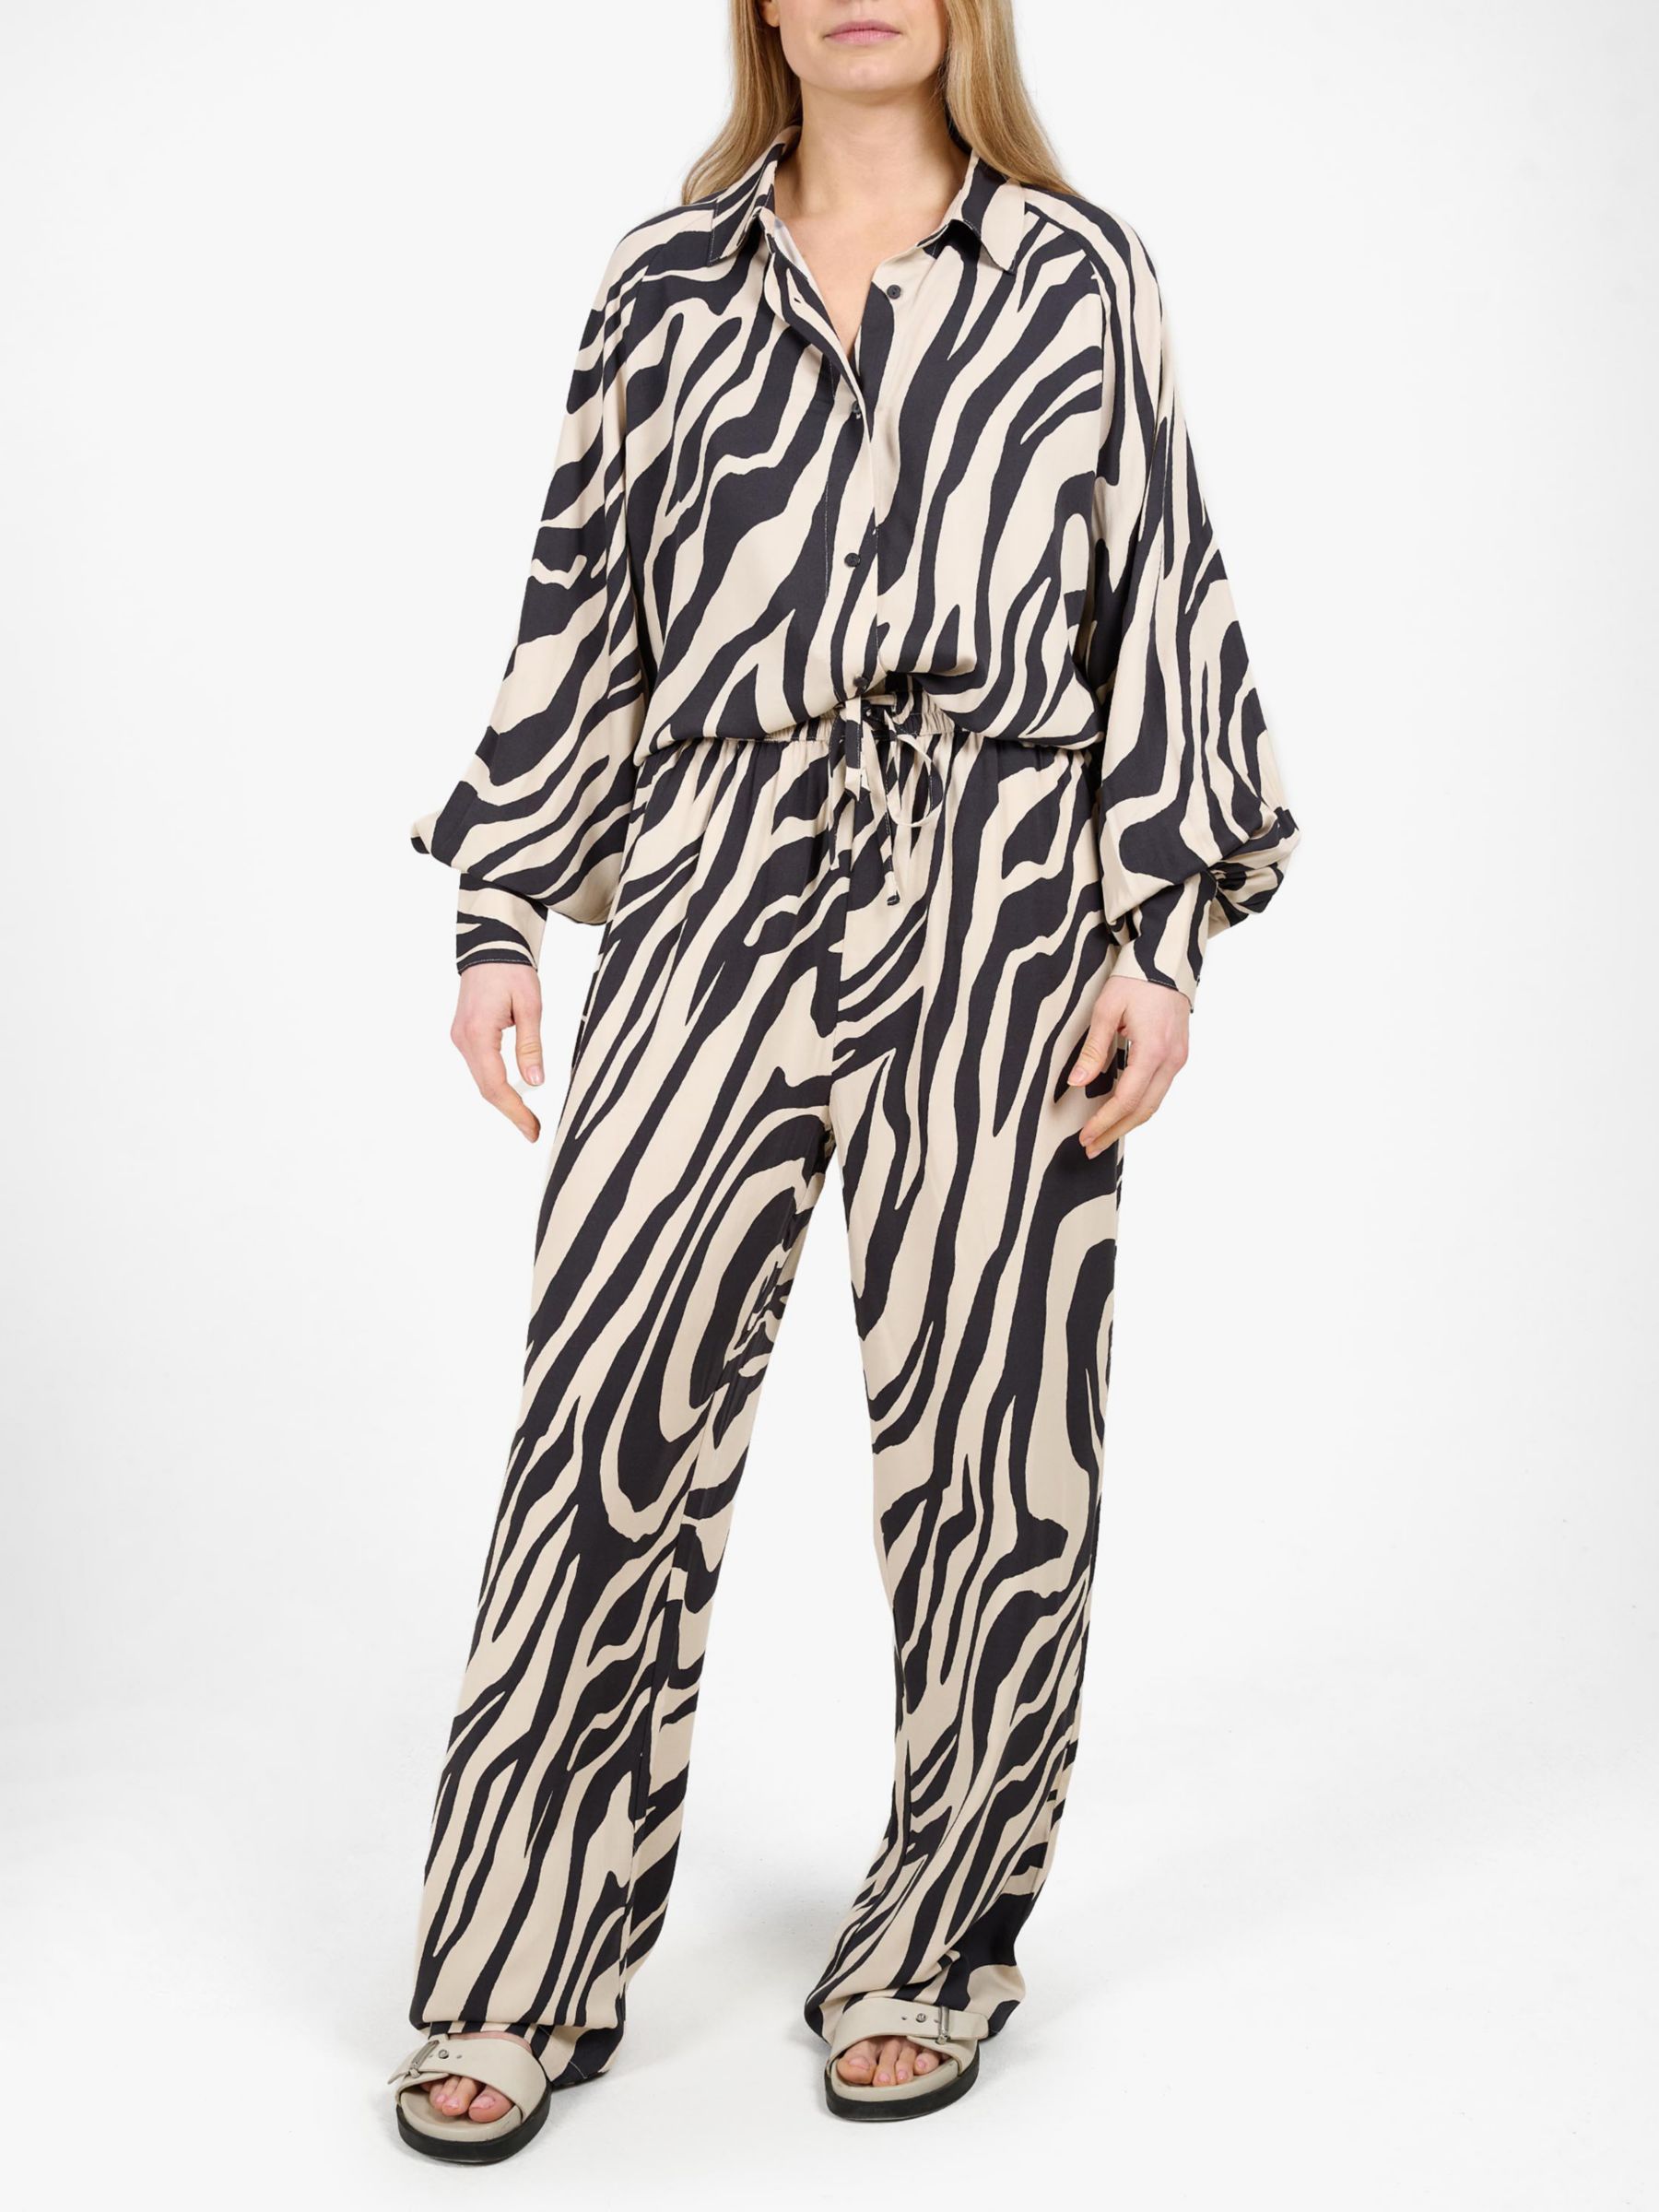 Buy Tutti & Co Adorn Abstract Print Oversized Shirt, Black/Stone Online at johnlewis.com